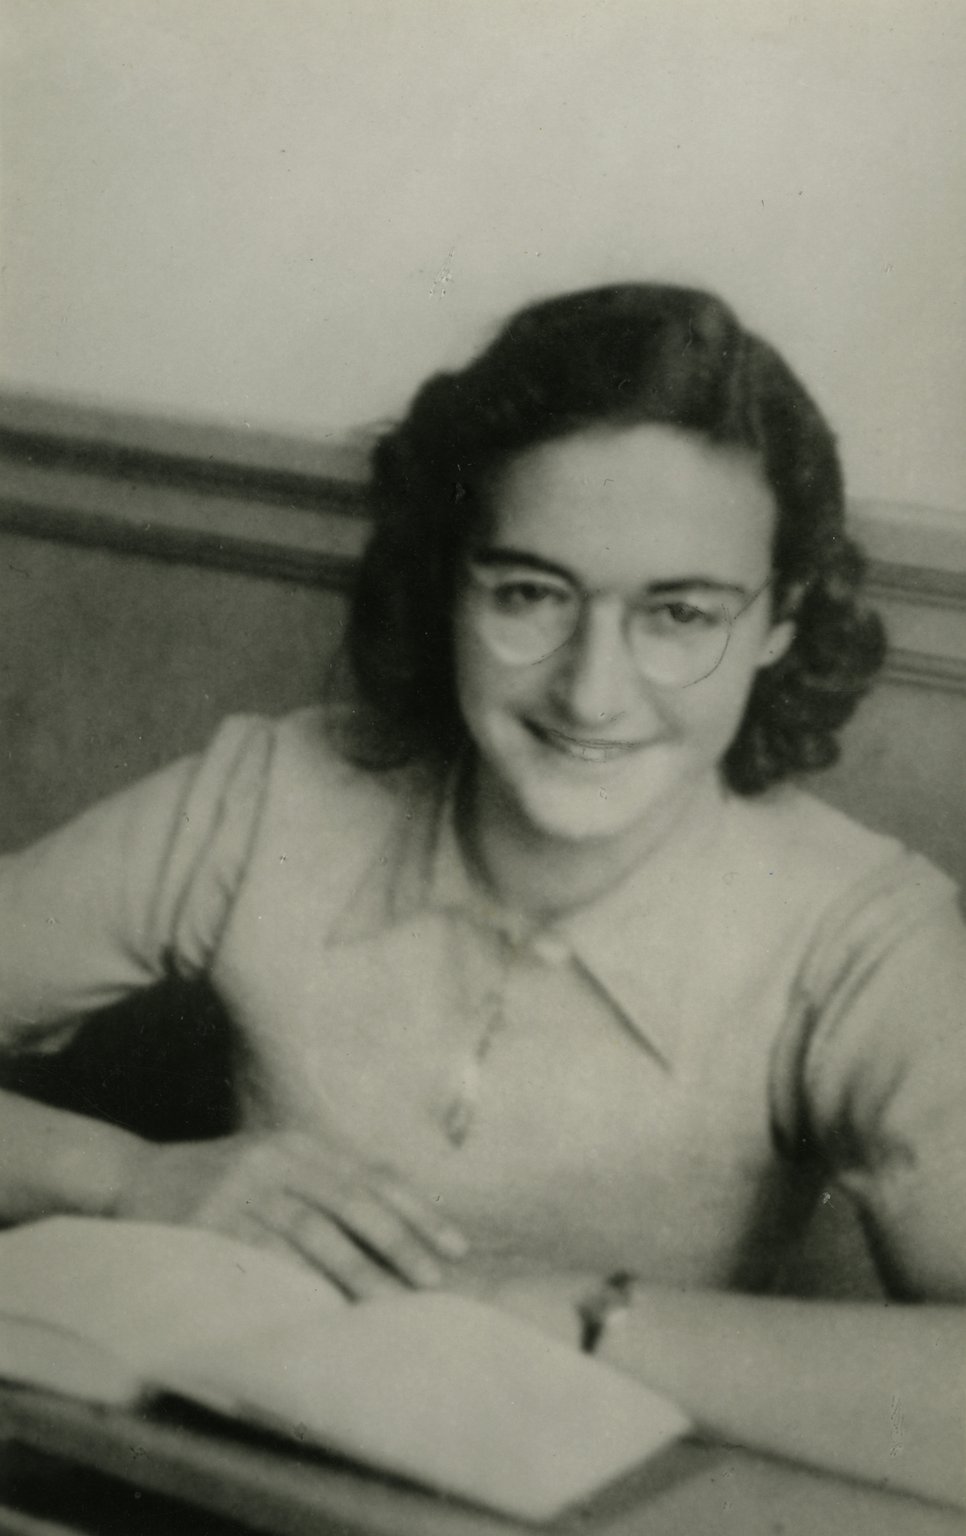 A school photo of Margot Frank at the Jewish Lyceum, December 1941.